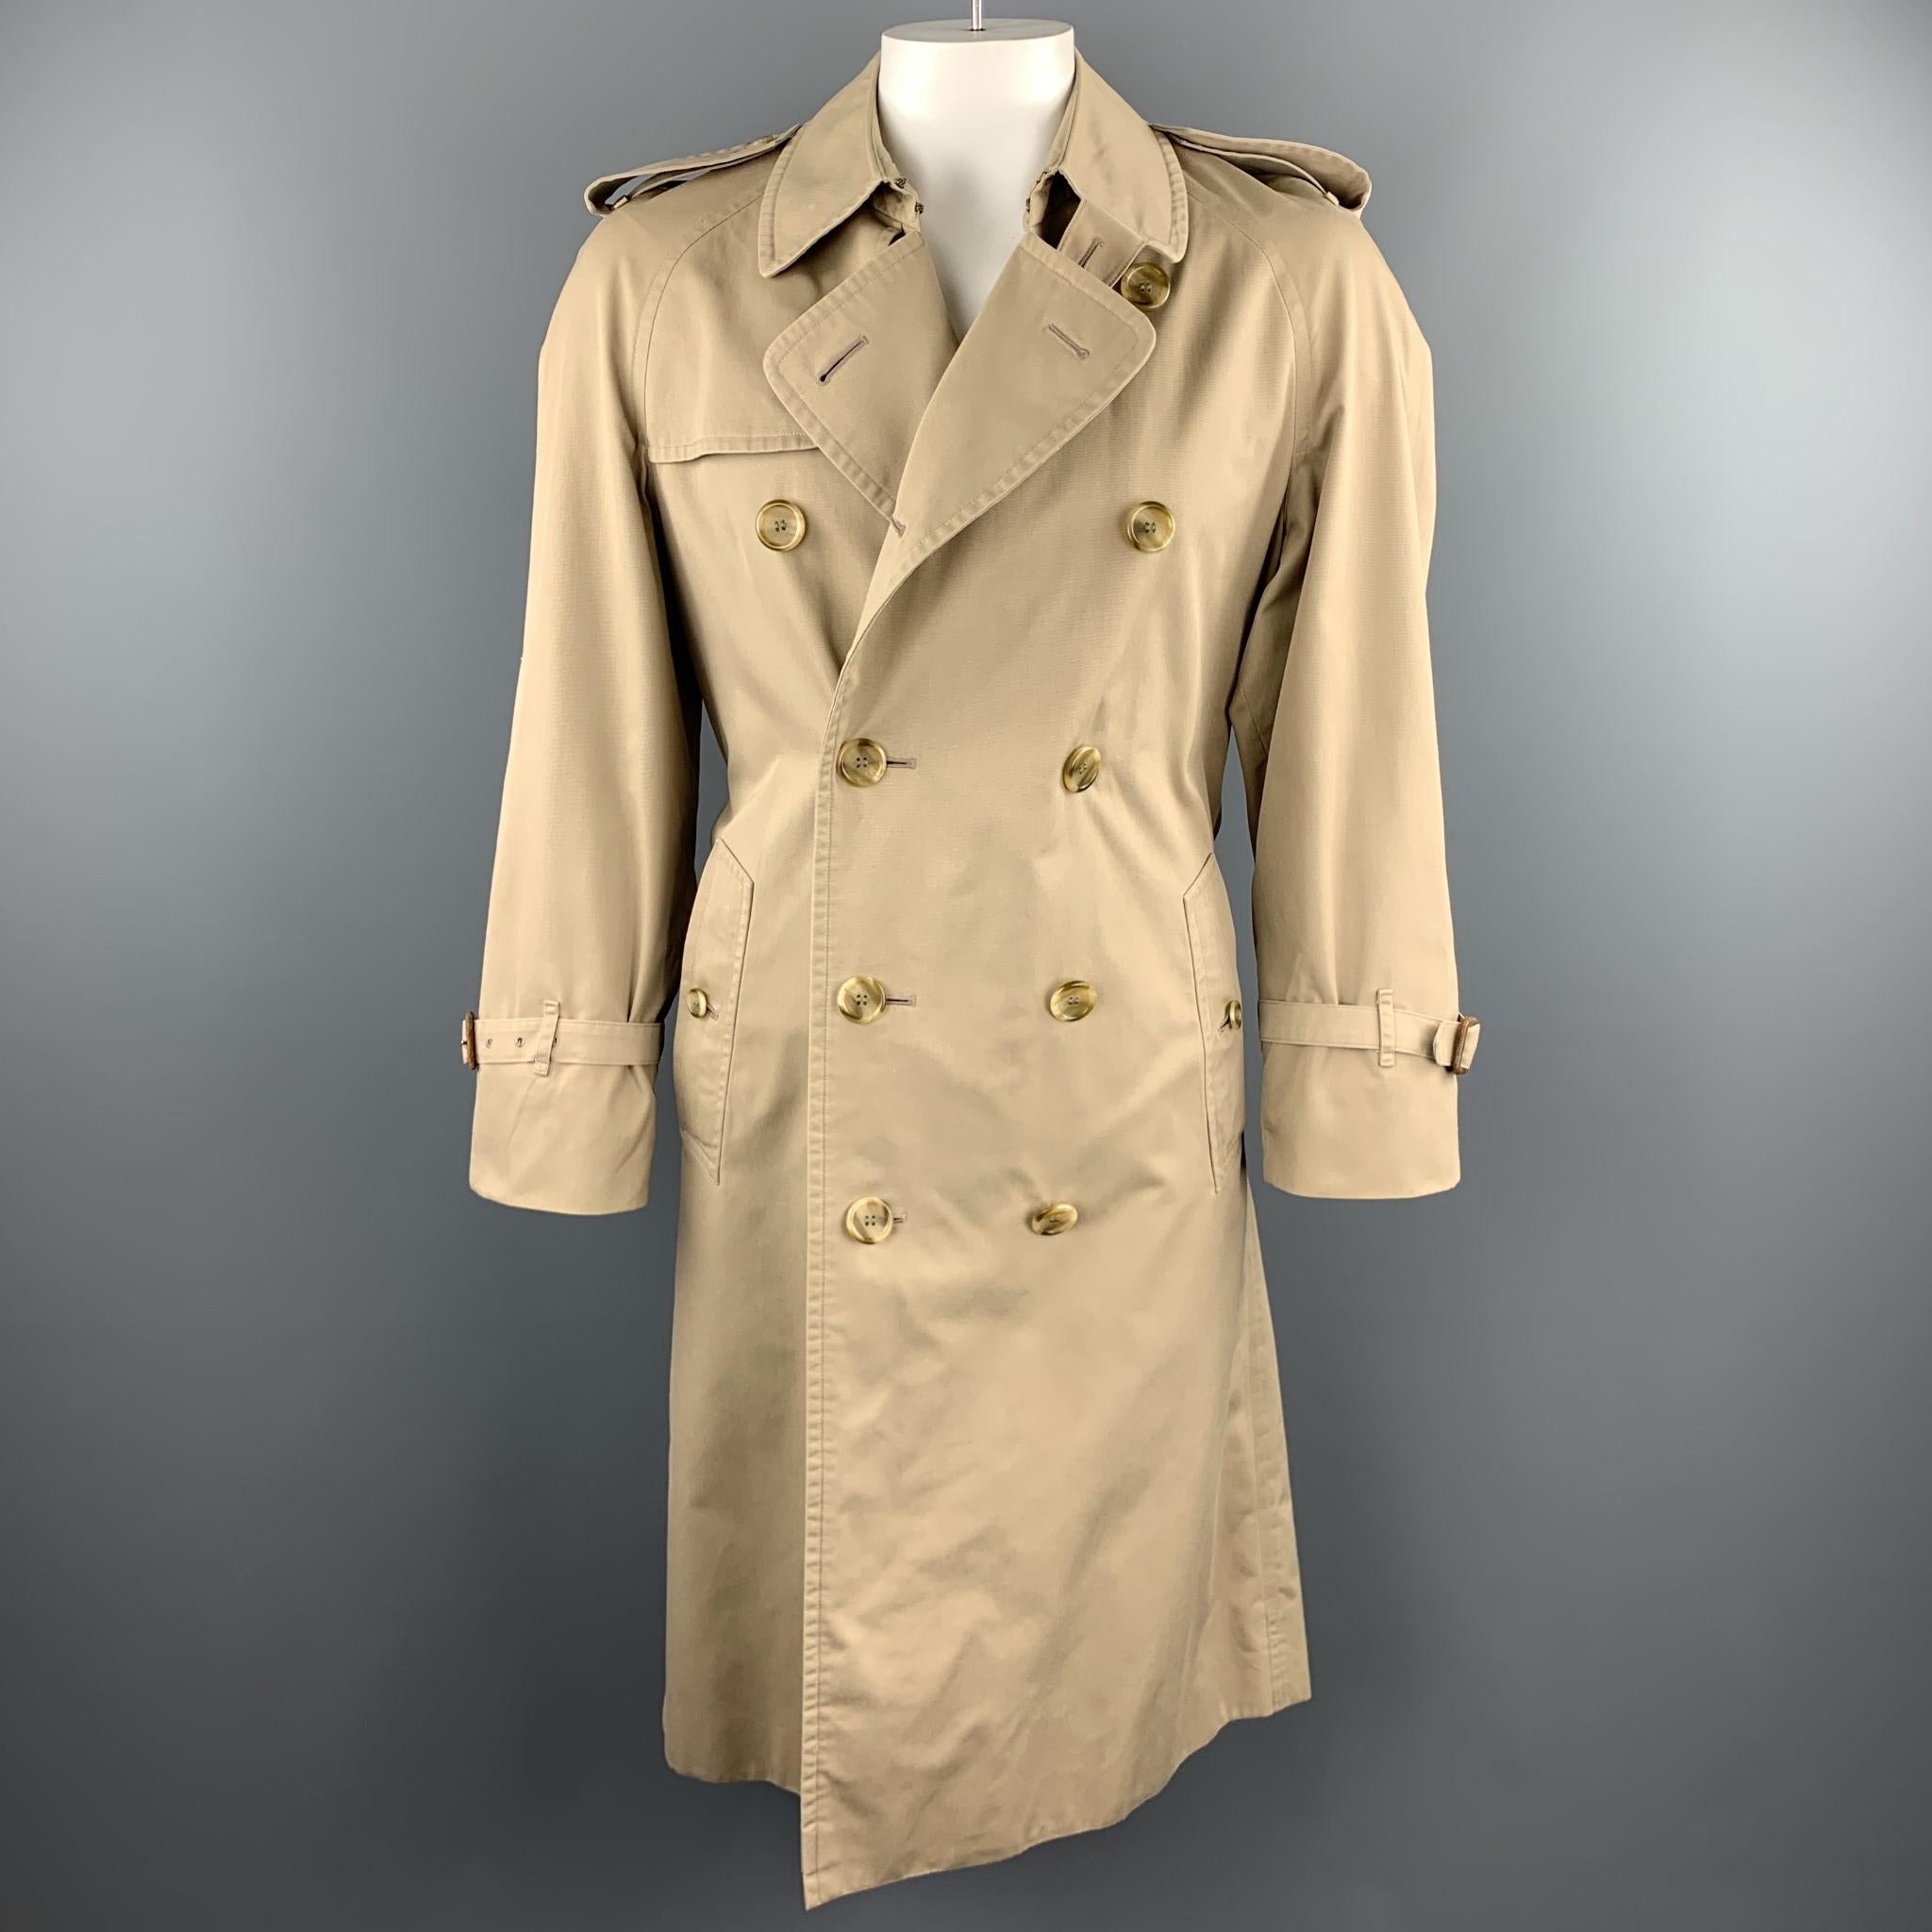 Vintage BURBERRY trench coat comes in classic cotton blend khaki twill with epaulets, double breasted front, raglan belt cuff sleeves, and plaid liner. Made in England.

Very Good Pre-Owned Condition.
Marked: (no size)

Measurements:

Shoulder: 18